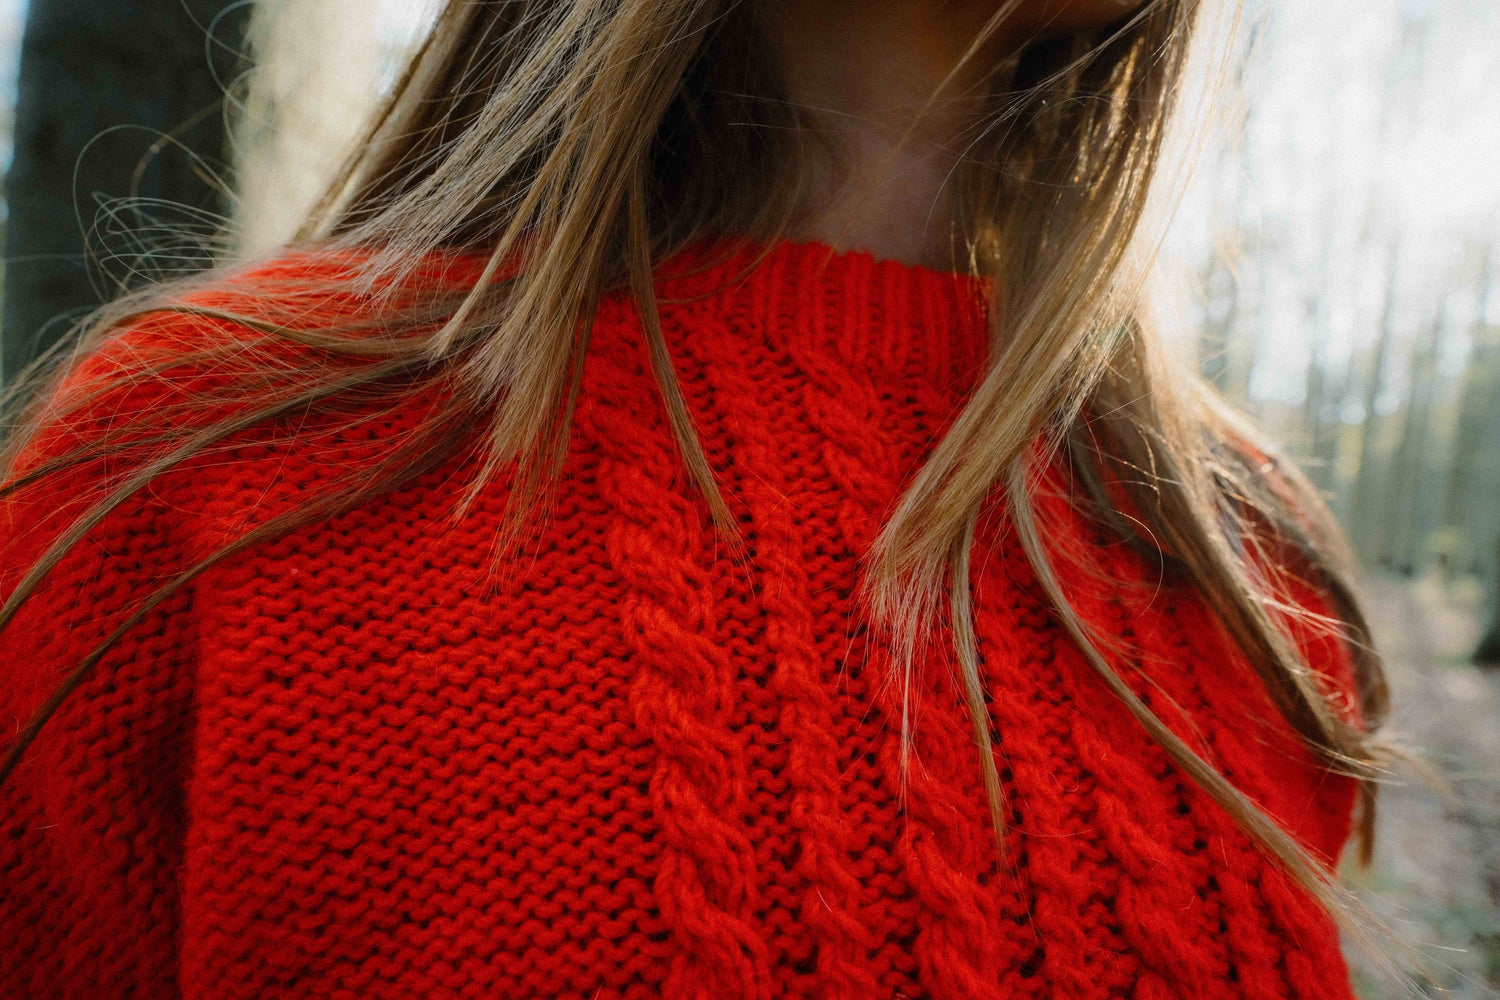 Close-up of the HELIOS SWEATER designed by Lív Ulven, highlighting the intricate cabled stitch pattern, knitted in vibrant red Mota Wooldreamers yarn.